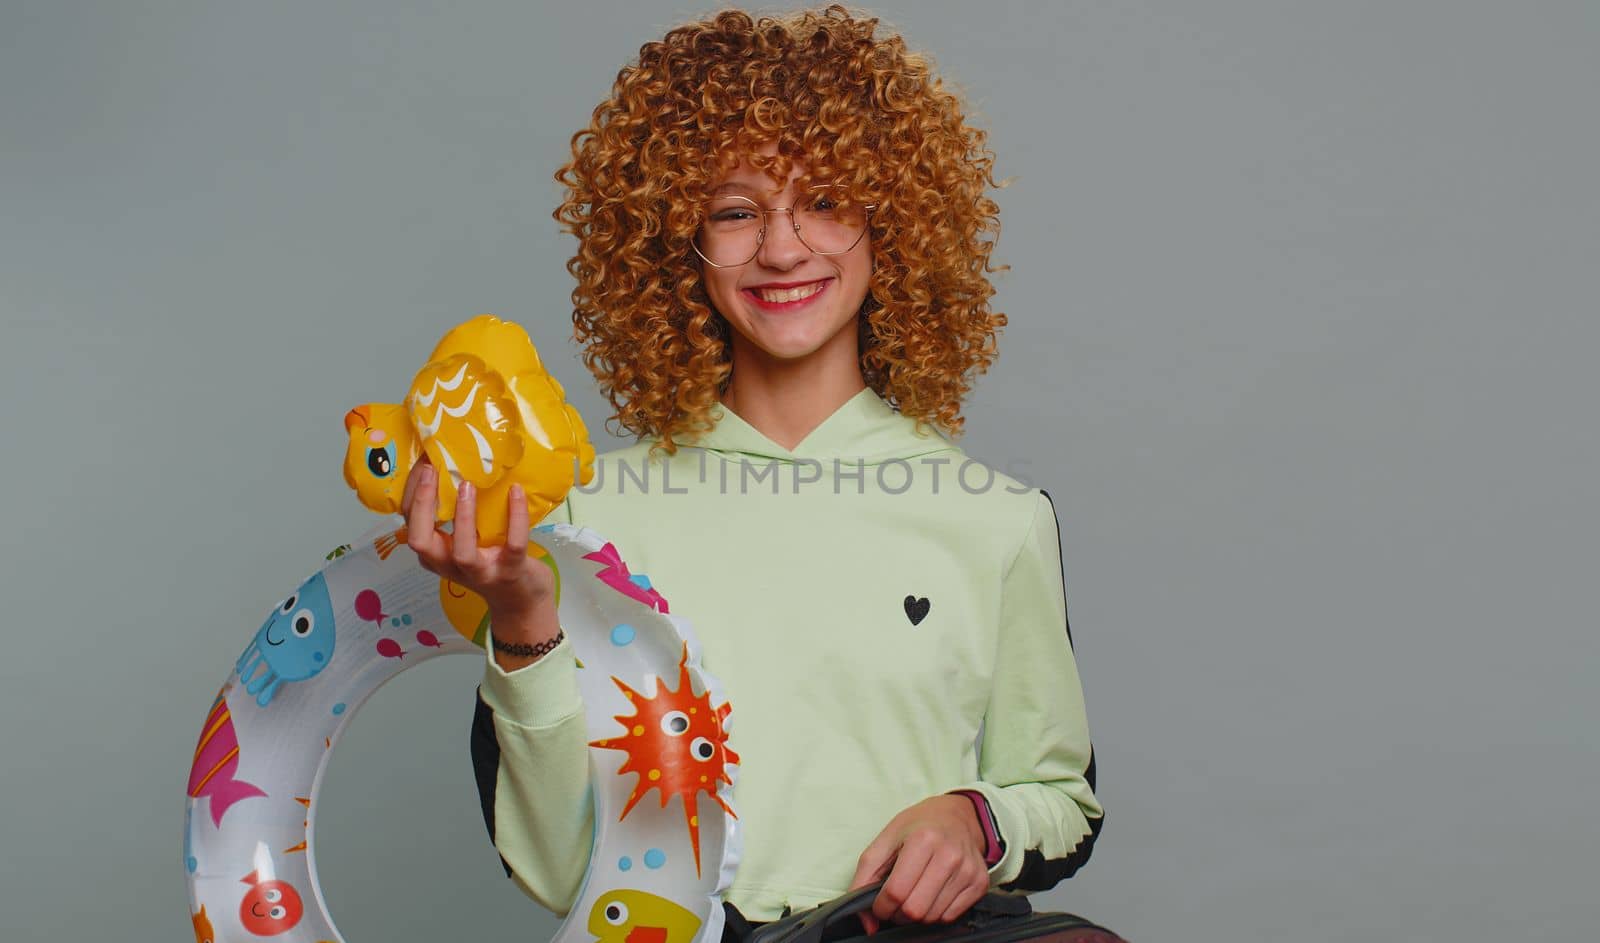 Funny furious teenager girl with curly frizzy hairstyle pretending to be a tiger, imitate parody of lion fierce shout roar, making cats claws scratching moves, flirting. Child kid on gray background